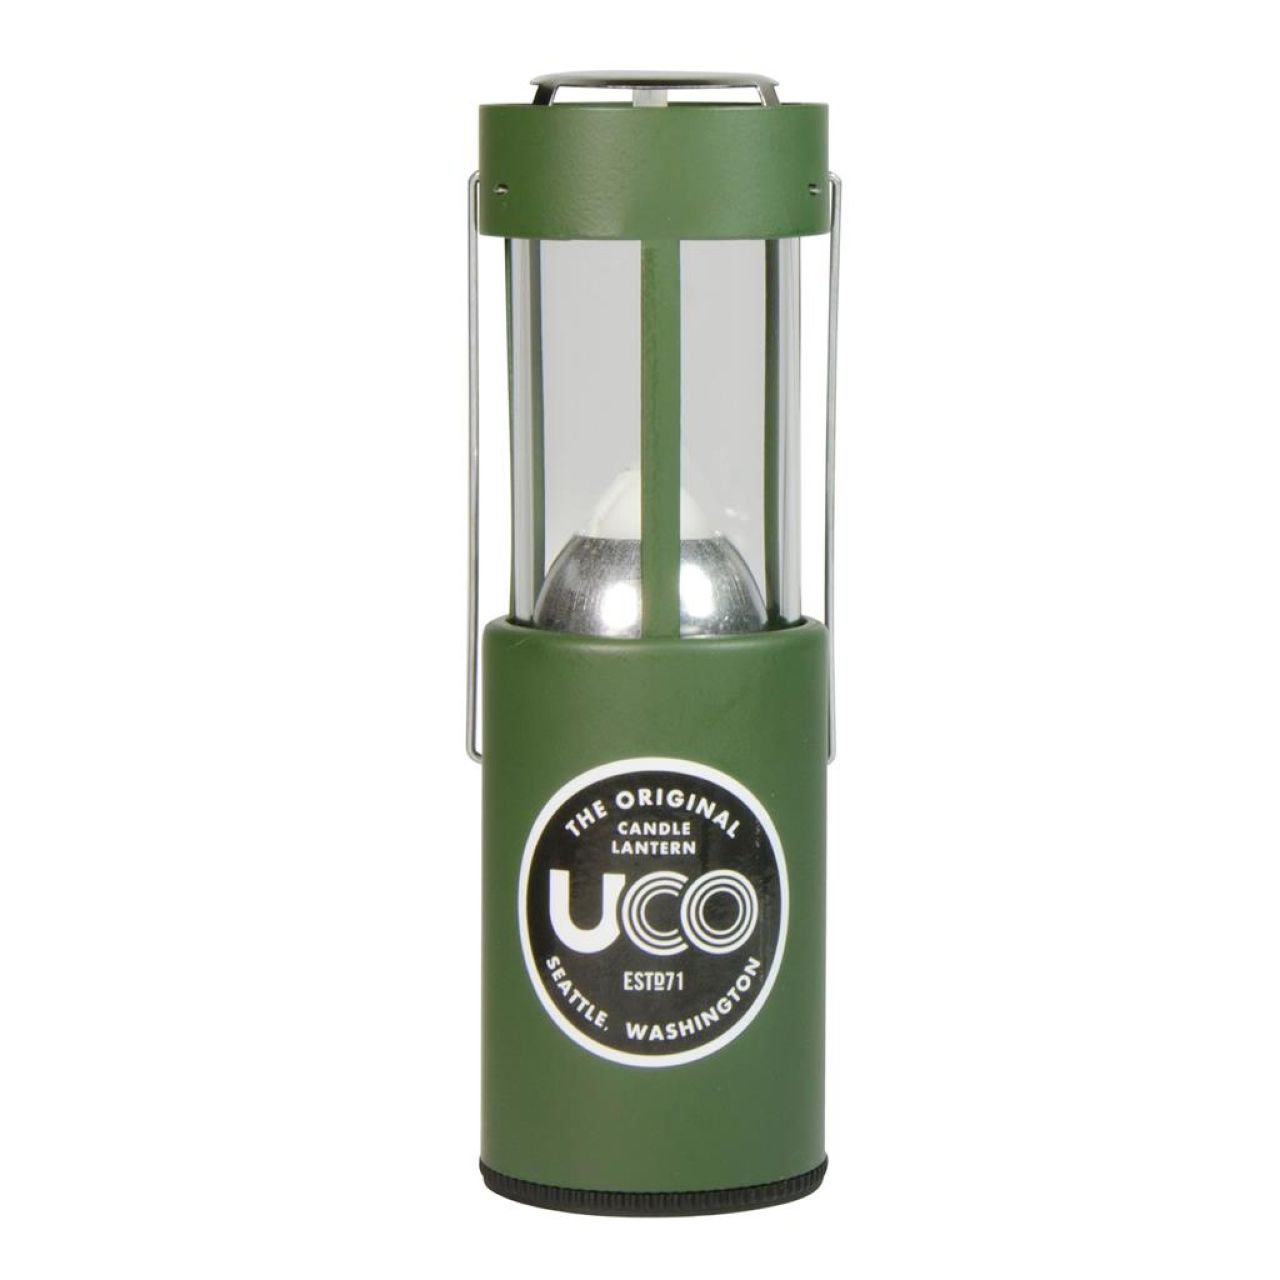  UCO Original Brass Candle Lantern Value Pack with 3 Additional  Candles and Storage Bag : Home & Kitchen